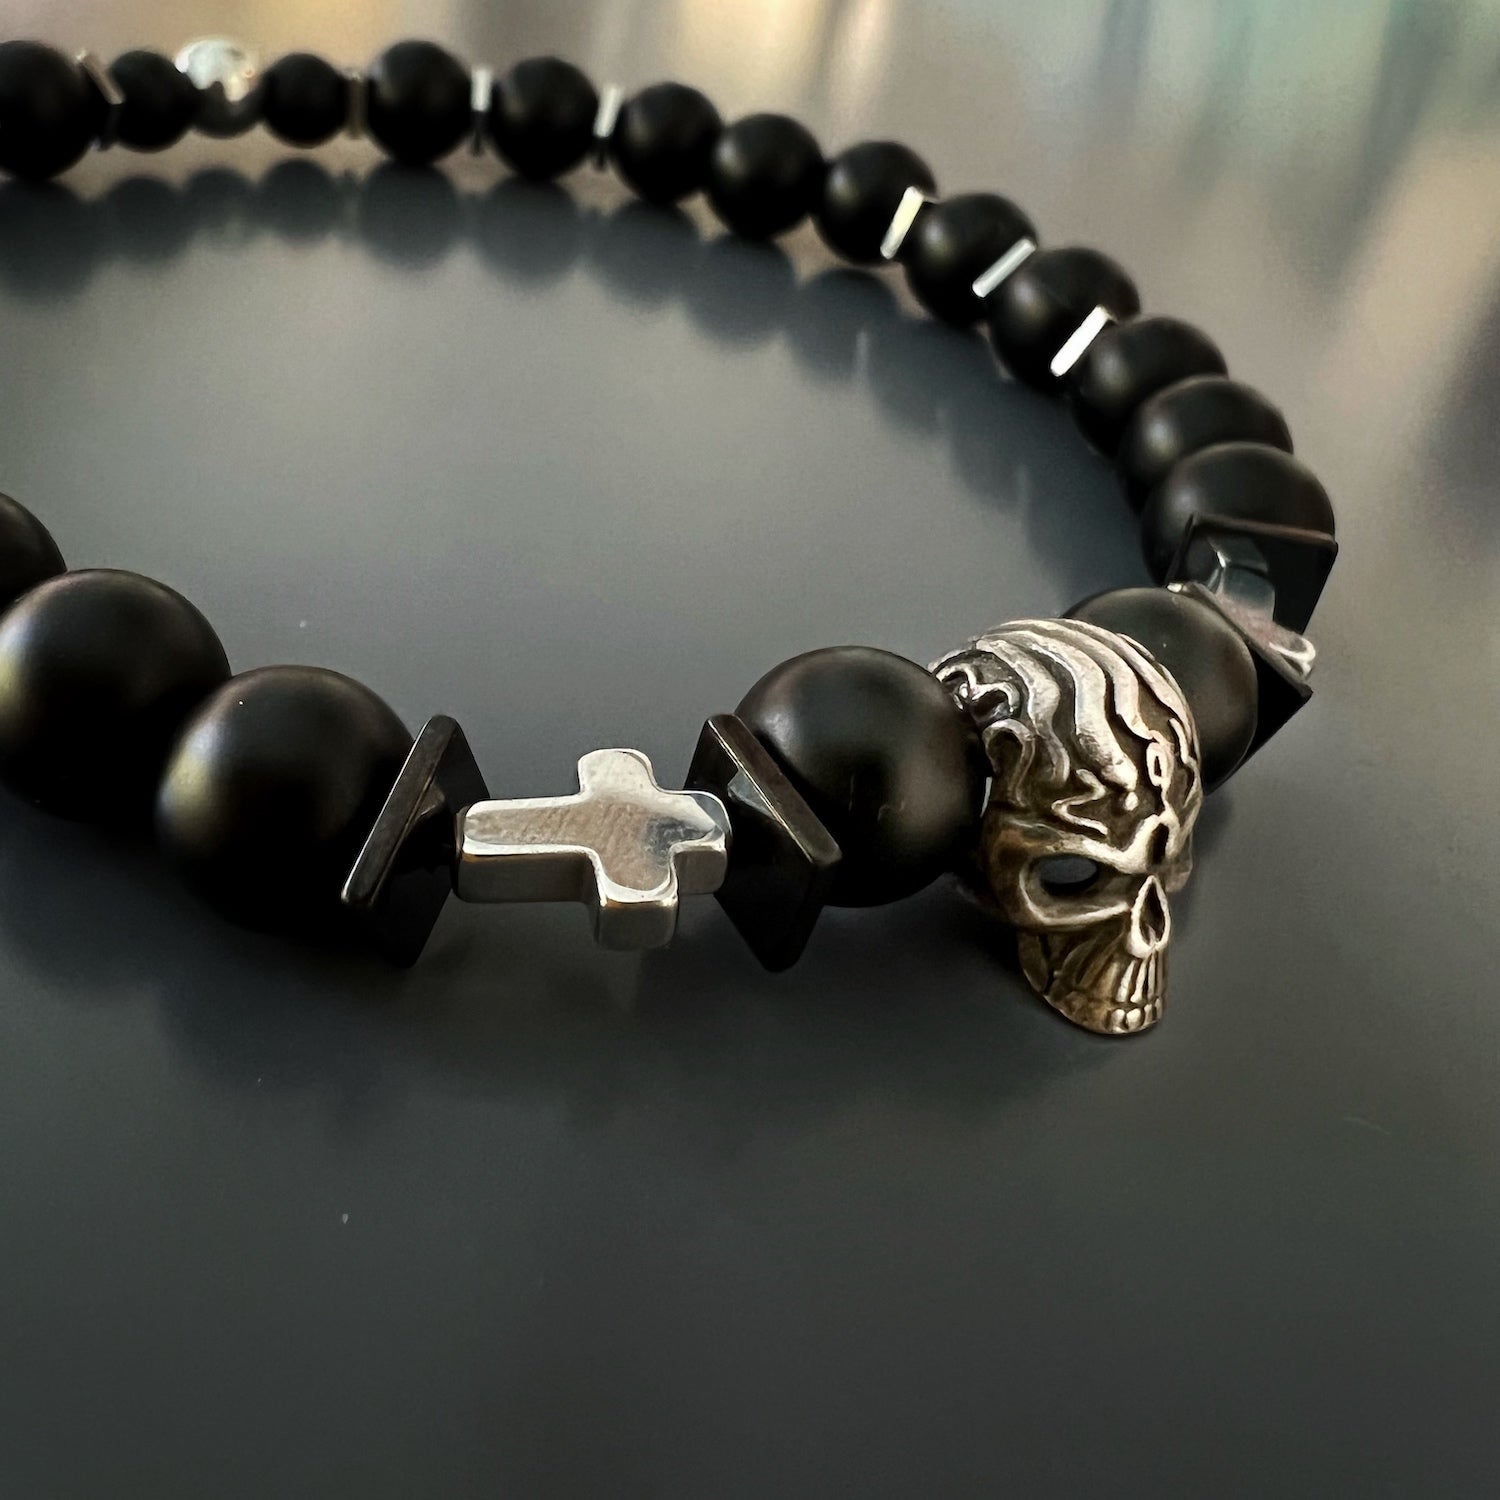 The combination of black onyx stones, sterling silver skull bead, and silver hematite cross beads creates a stylish and meaningful accessory that inspires courage and resilience.